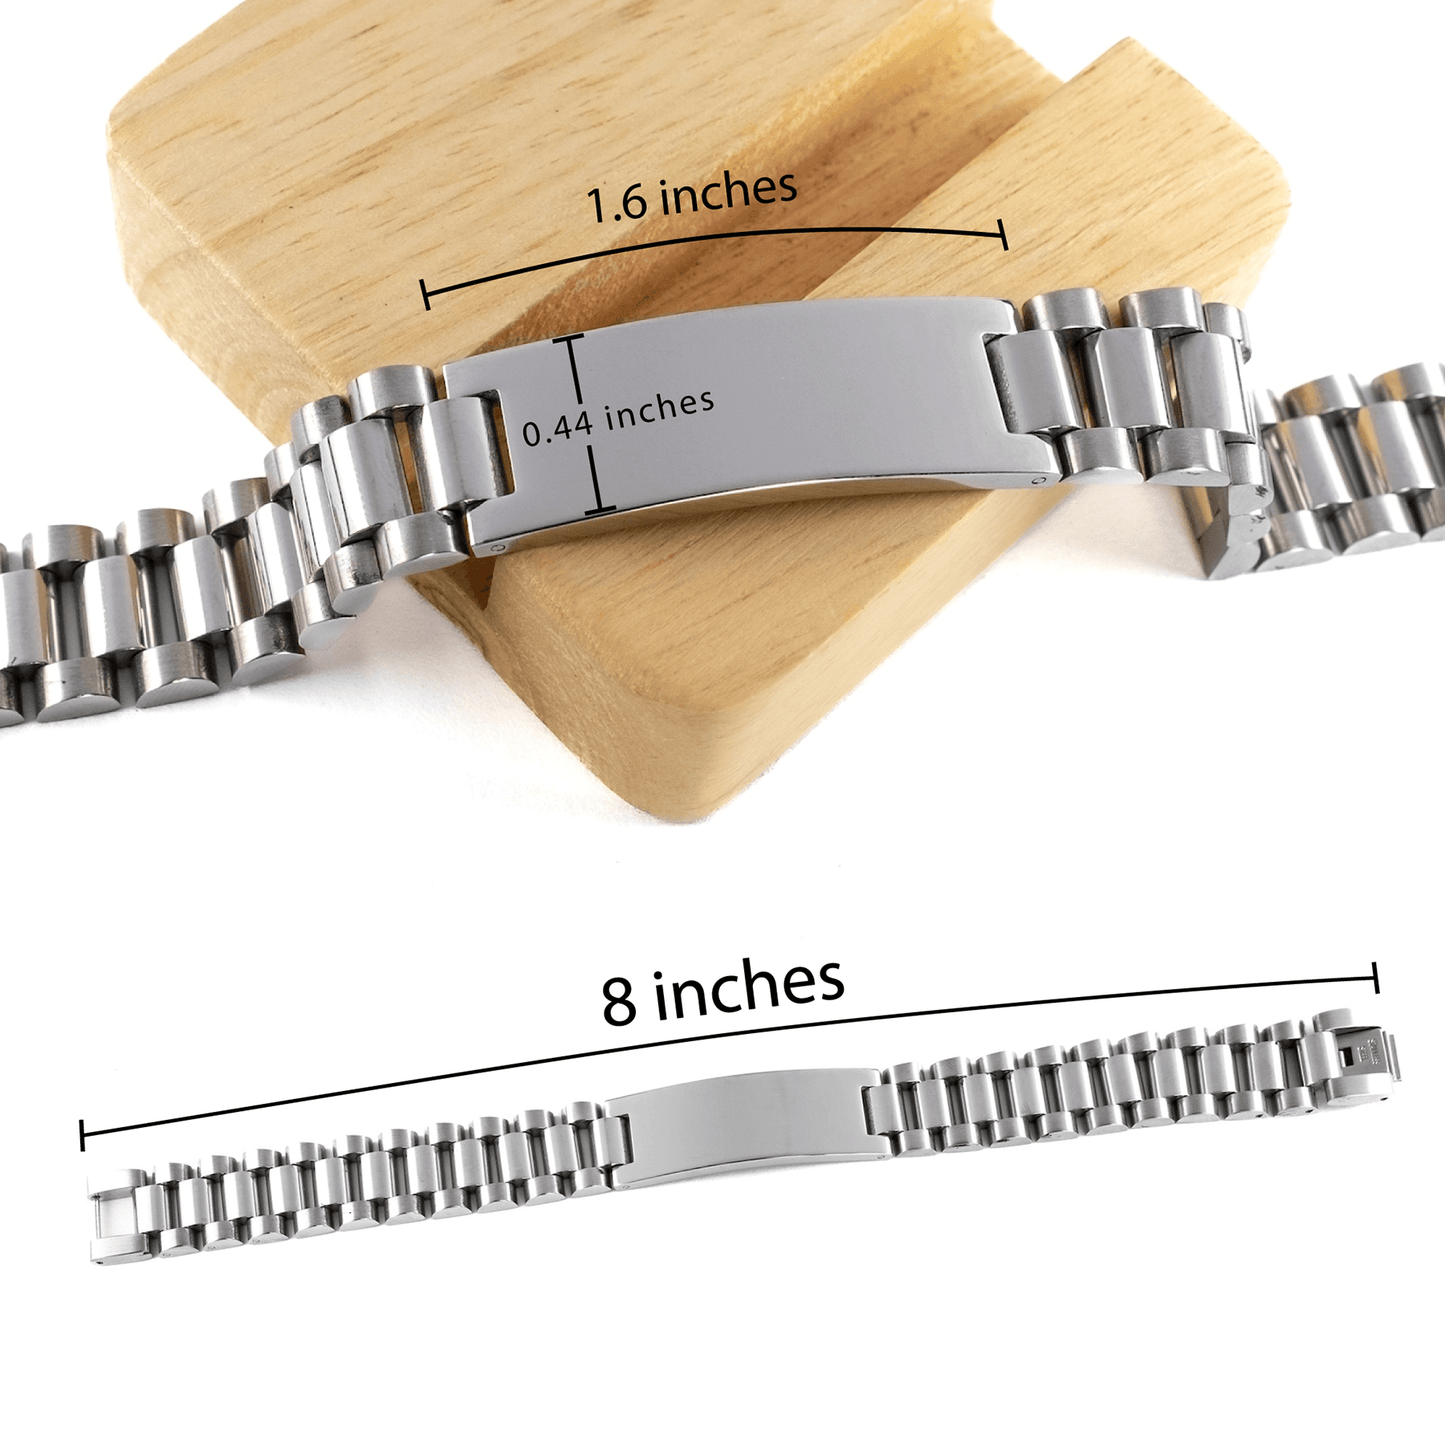 Remarkable Mechanical Engineer Gifts, Your dedication and hard work, Inspirational Birthday Christmas Unique Ladder Stainless Steel Bracelet For Mechanical Engineer, Coworkers, Men, Women, Friends - Mallard Moon Gift Shop